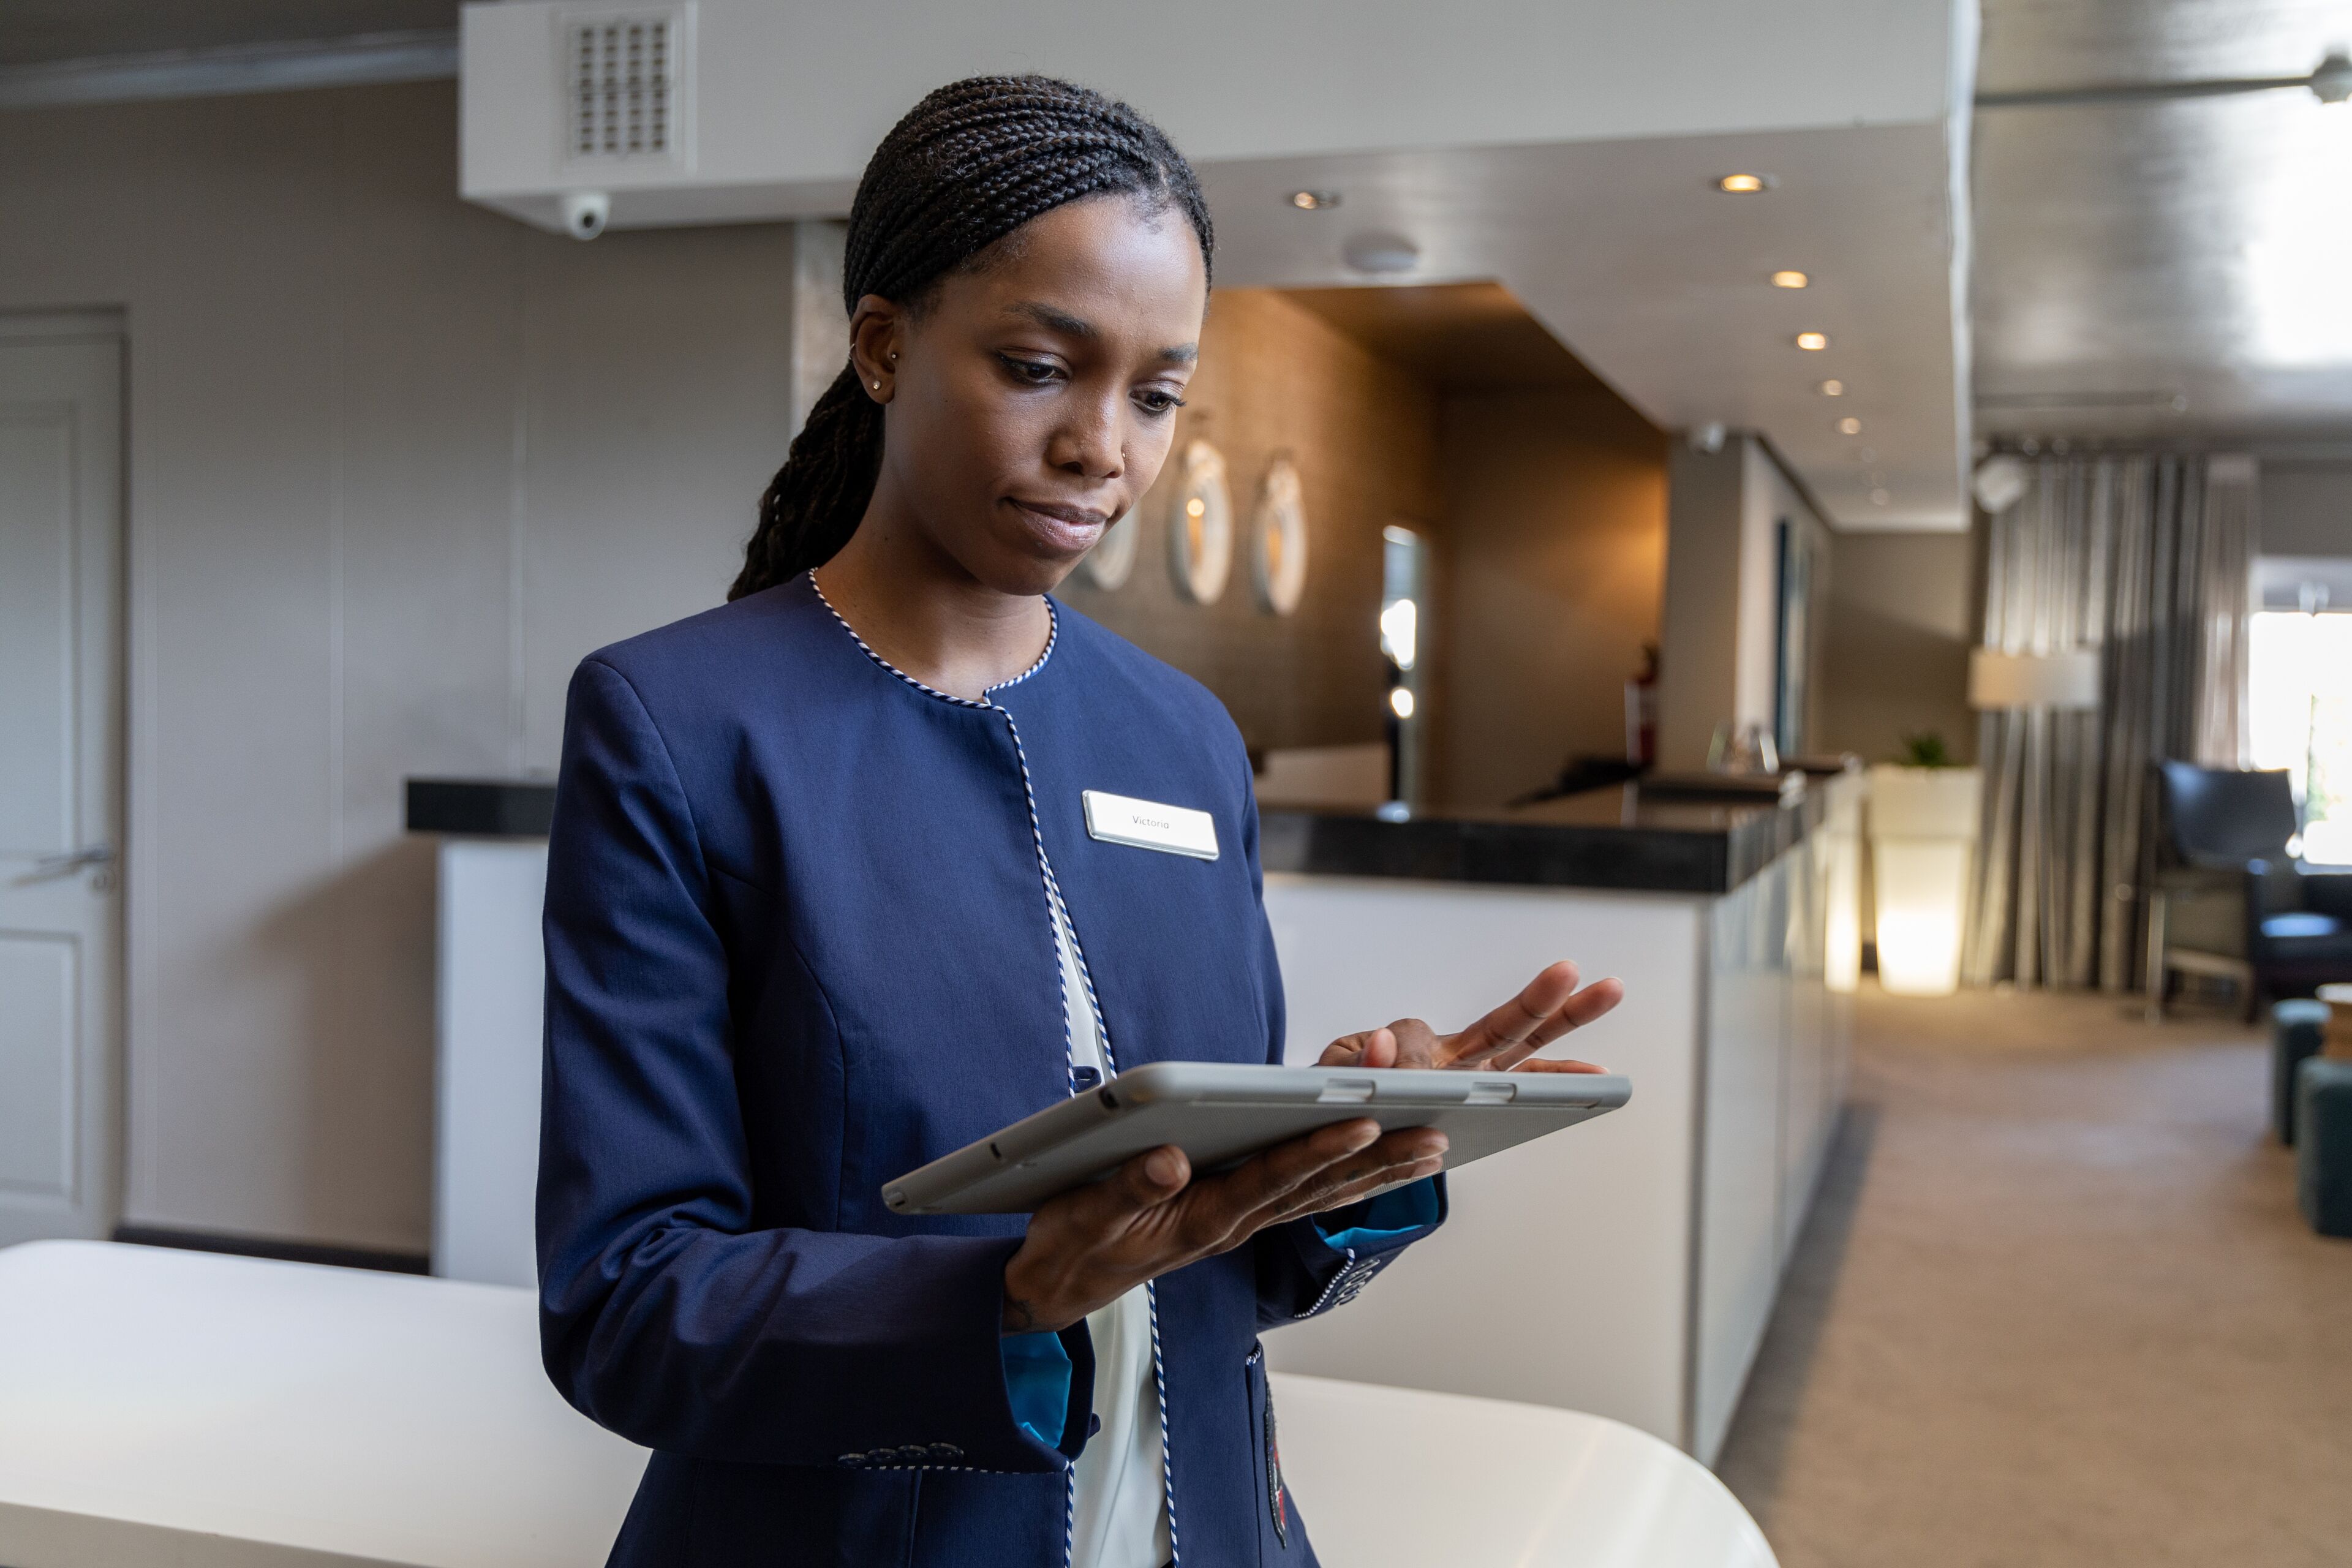 A hotel employee is engaged with a tablet, likely managing guest services or check-ins in the lobby area.

